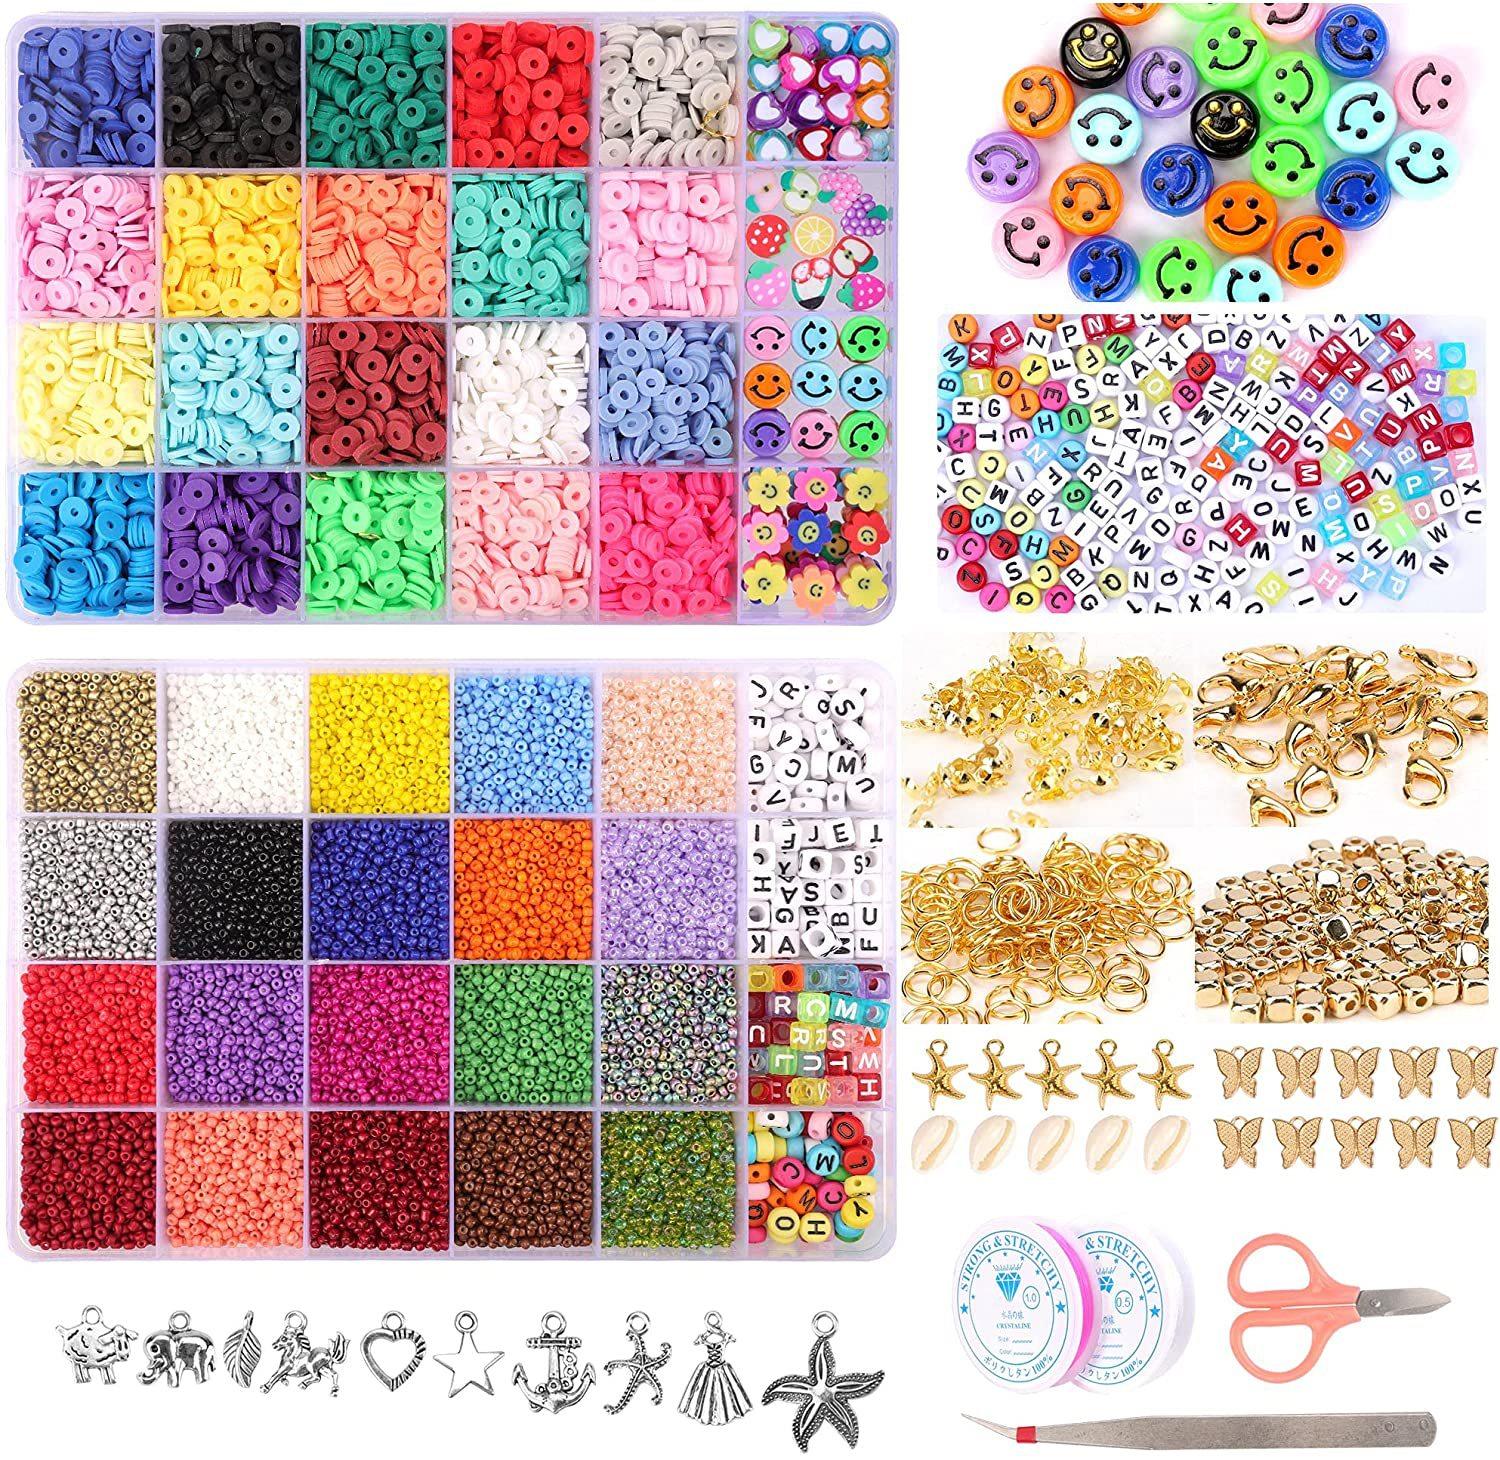 48 Grid Alphabet Beads Sets Diy Glass Kits Polymer Crystal Seed For Jewelry Making Oem Clay Bead Letter Bead Craft Kit